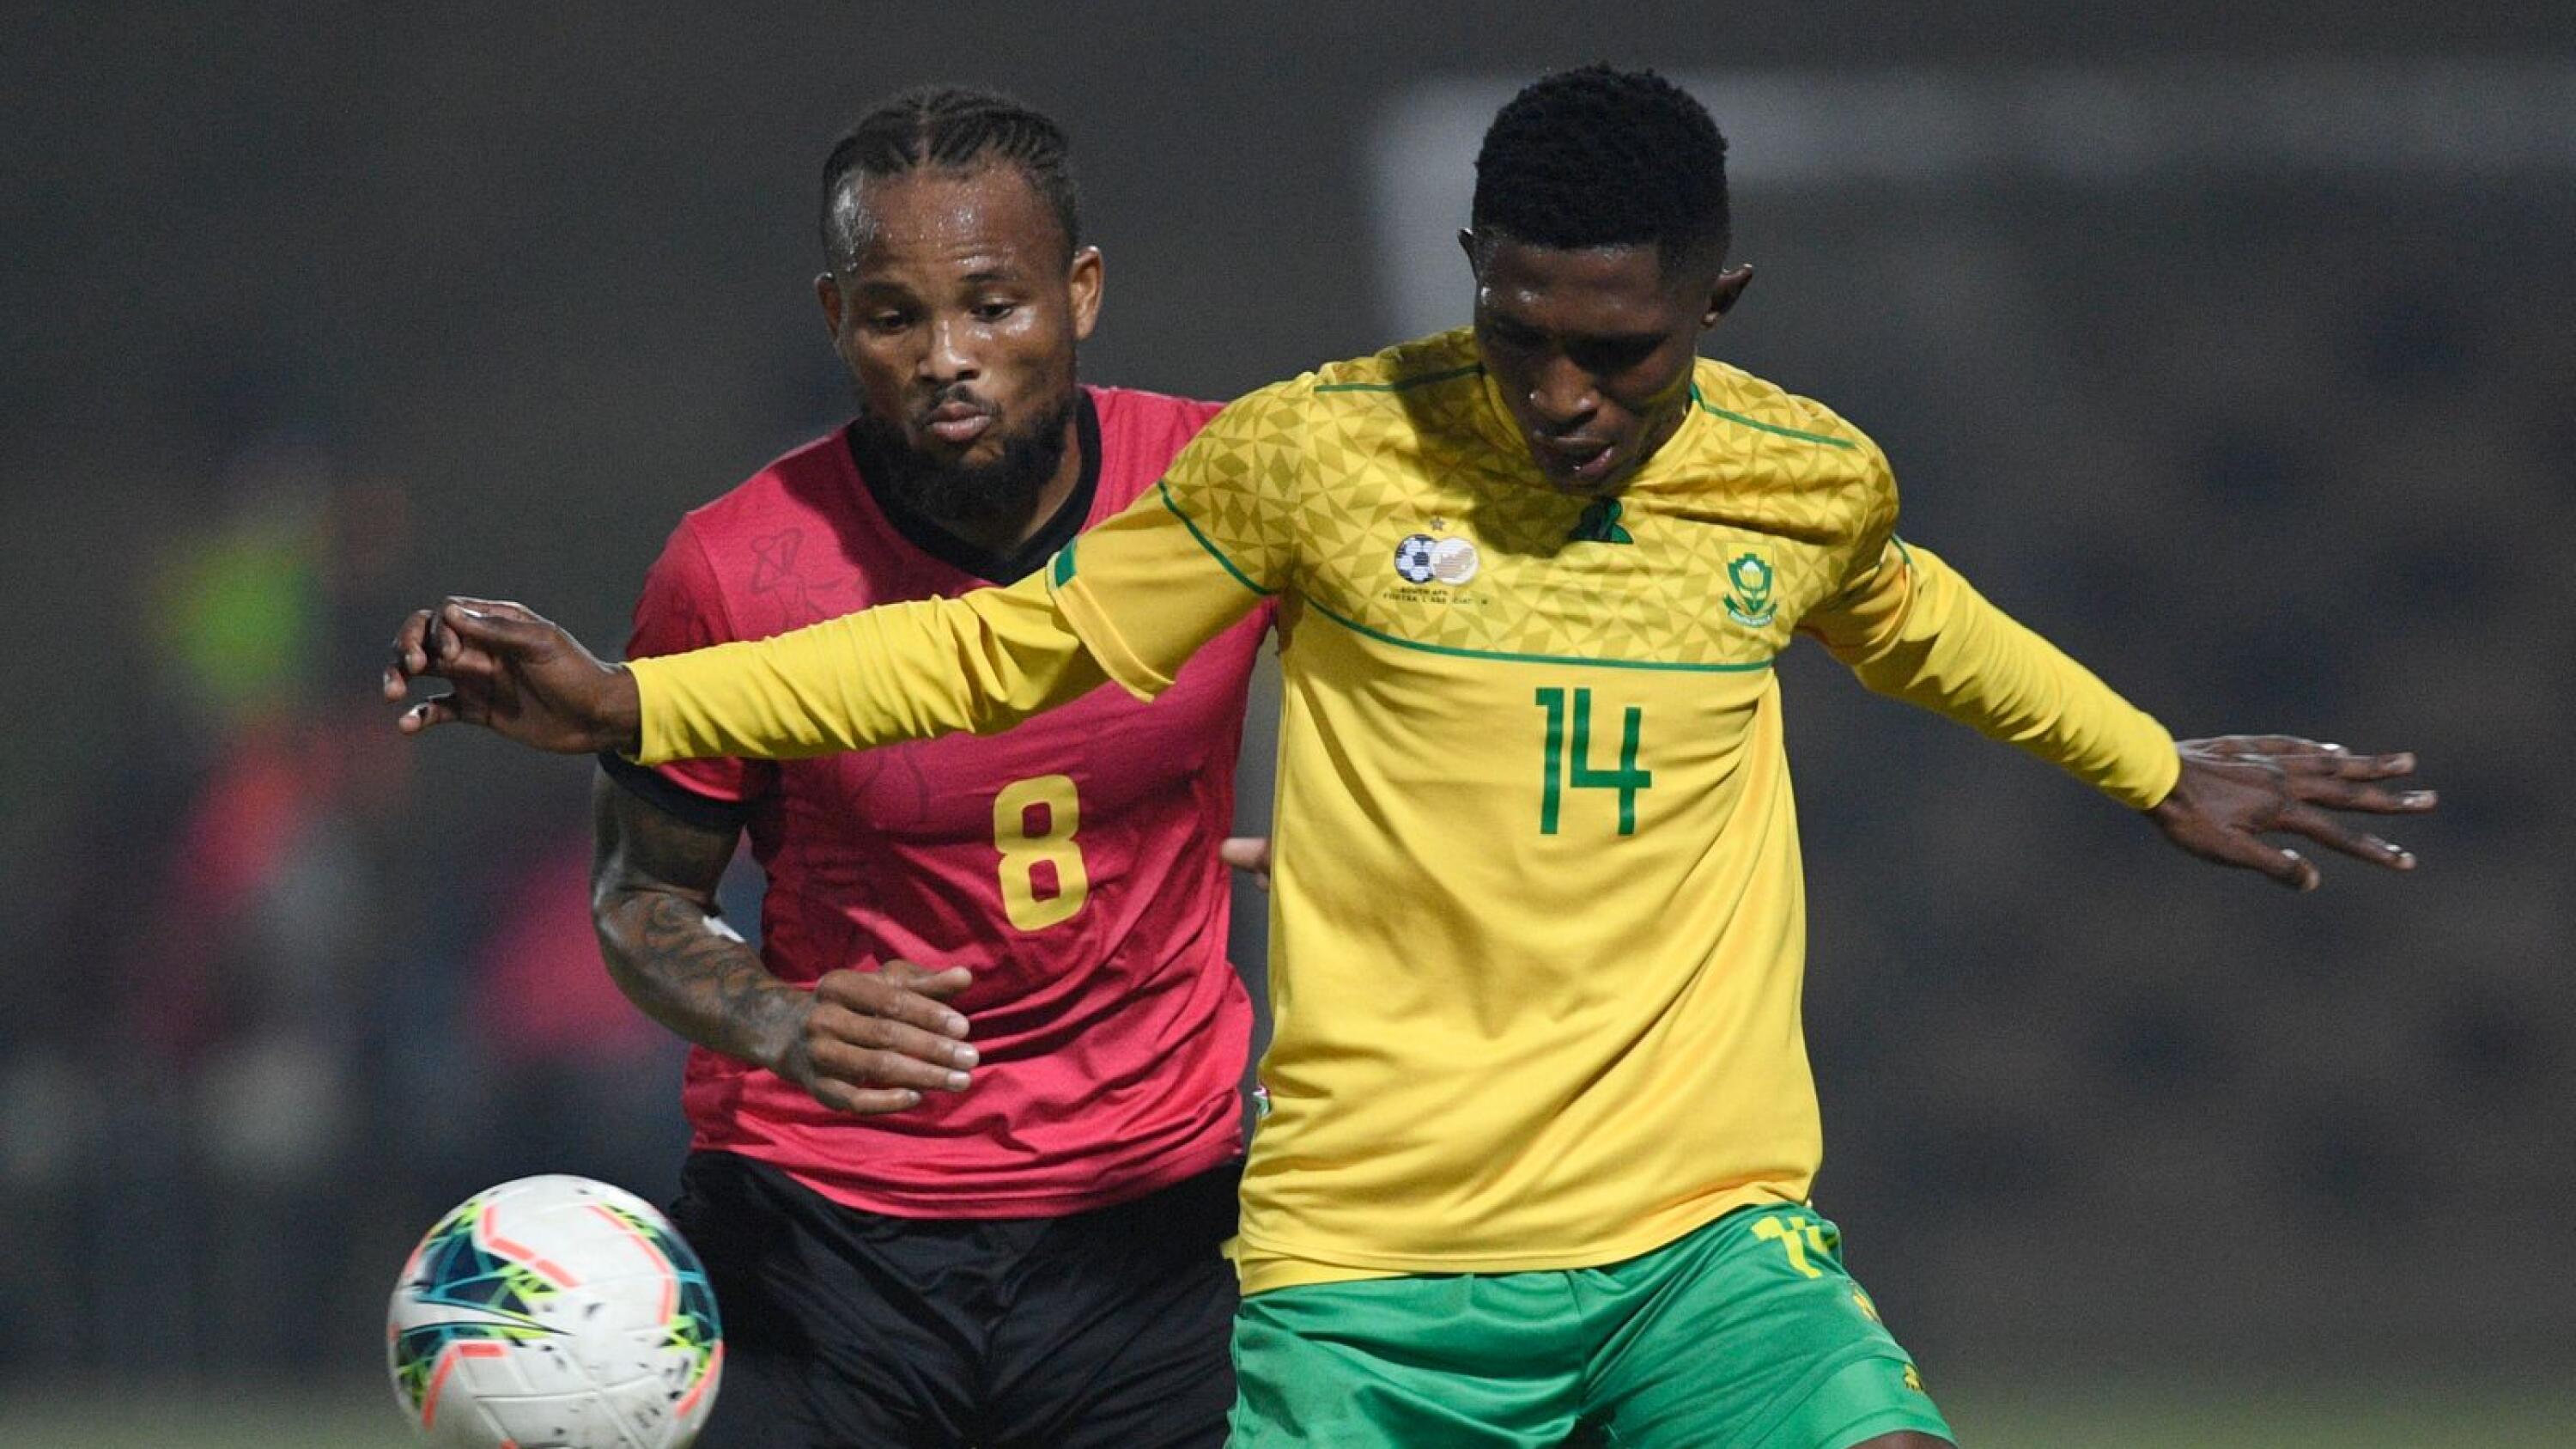 Keletso Sifama of South Africa is challenged Edmilson Dove of Mozambique during their Hollywoodbets Cosafa Cup quarter-final match at King Zwelithini Stadium in Umlazi on Wednesday